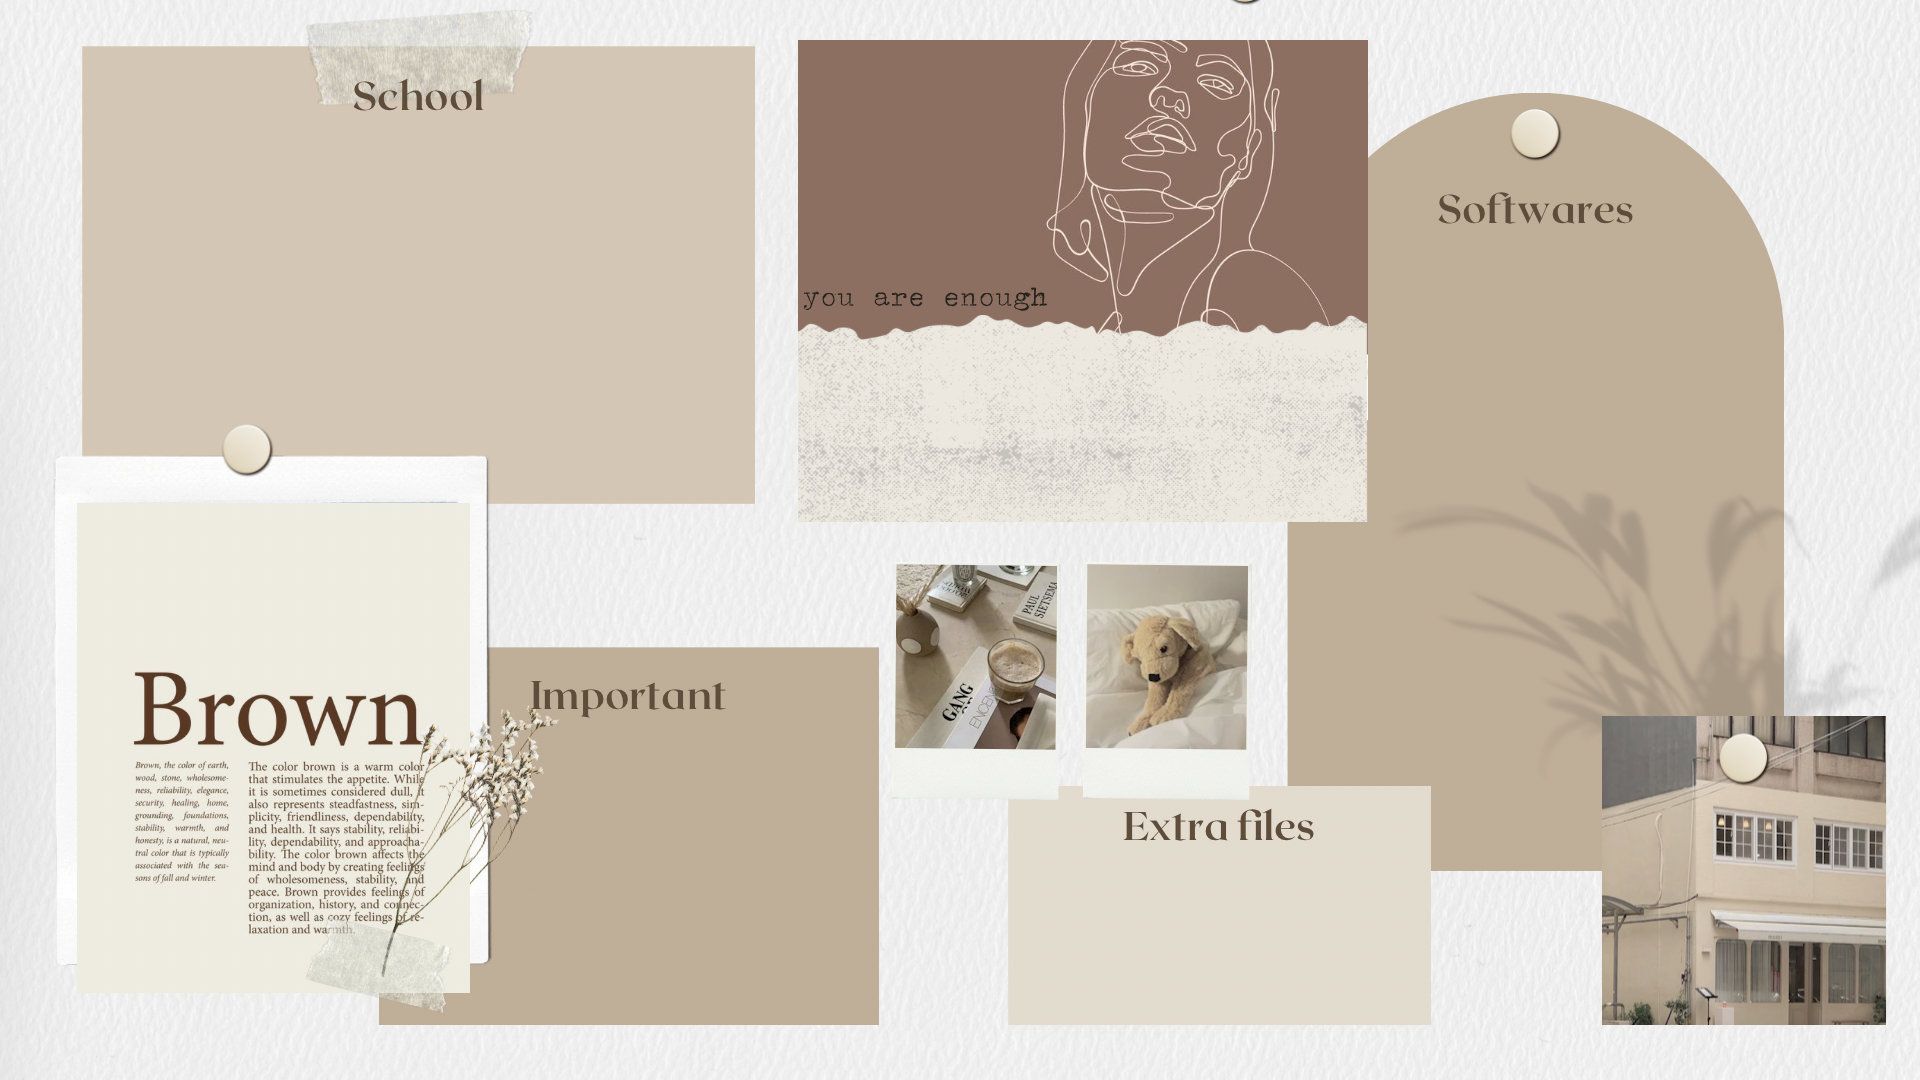 A mood board in brown tones, with a woman's face, a dog, and a house. - Light brown